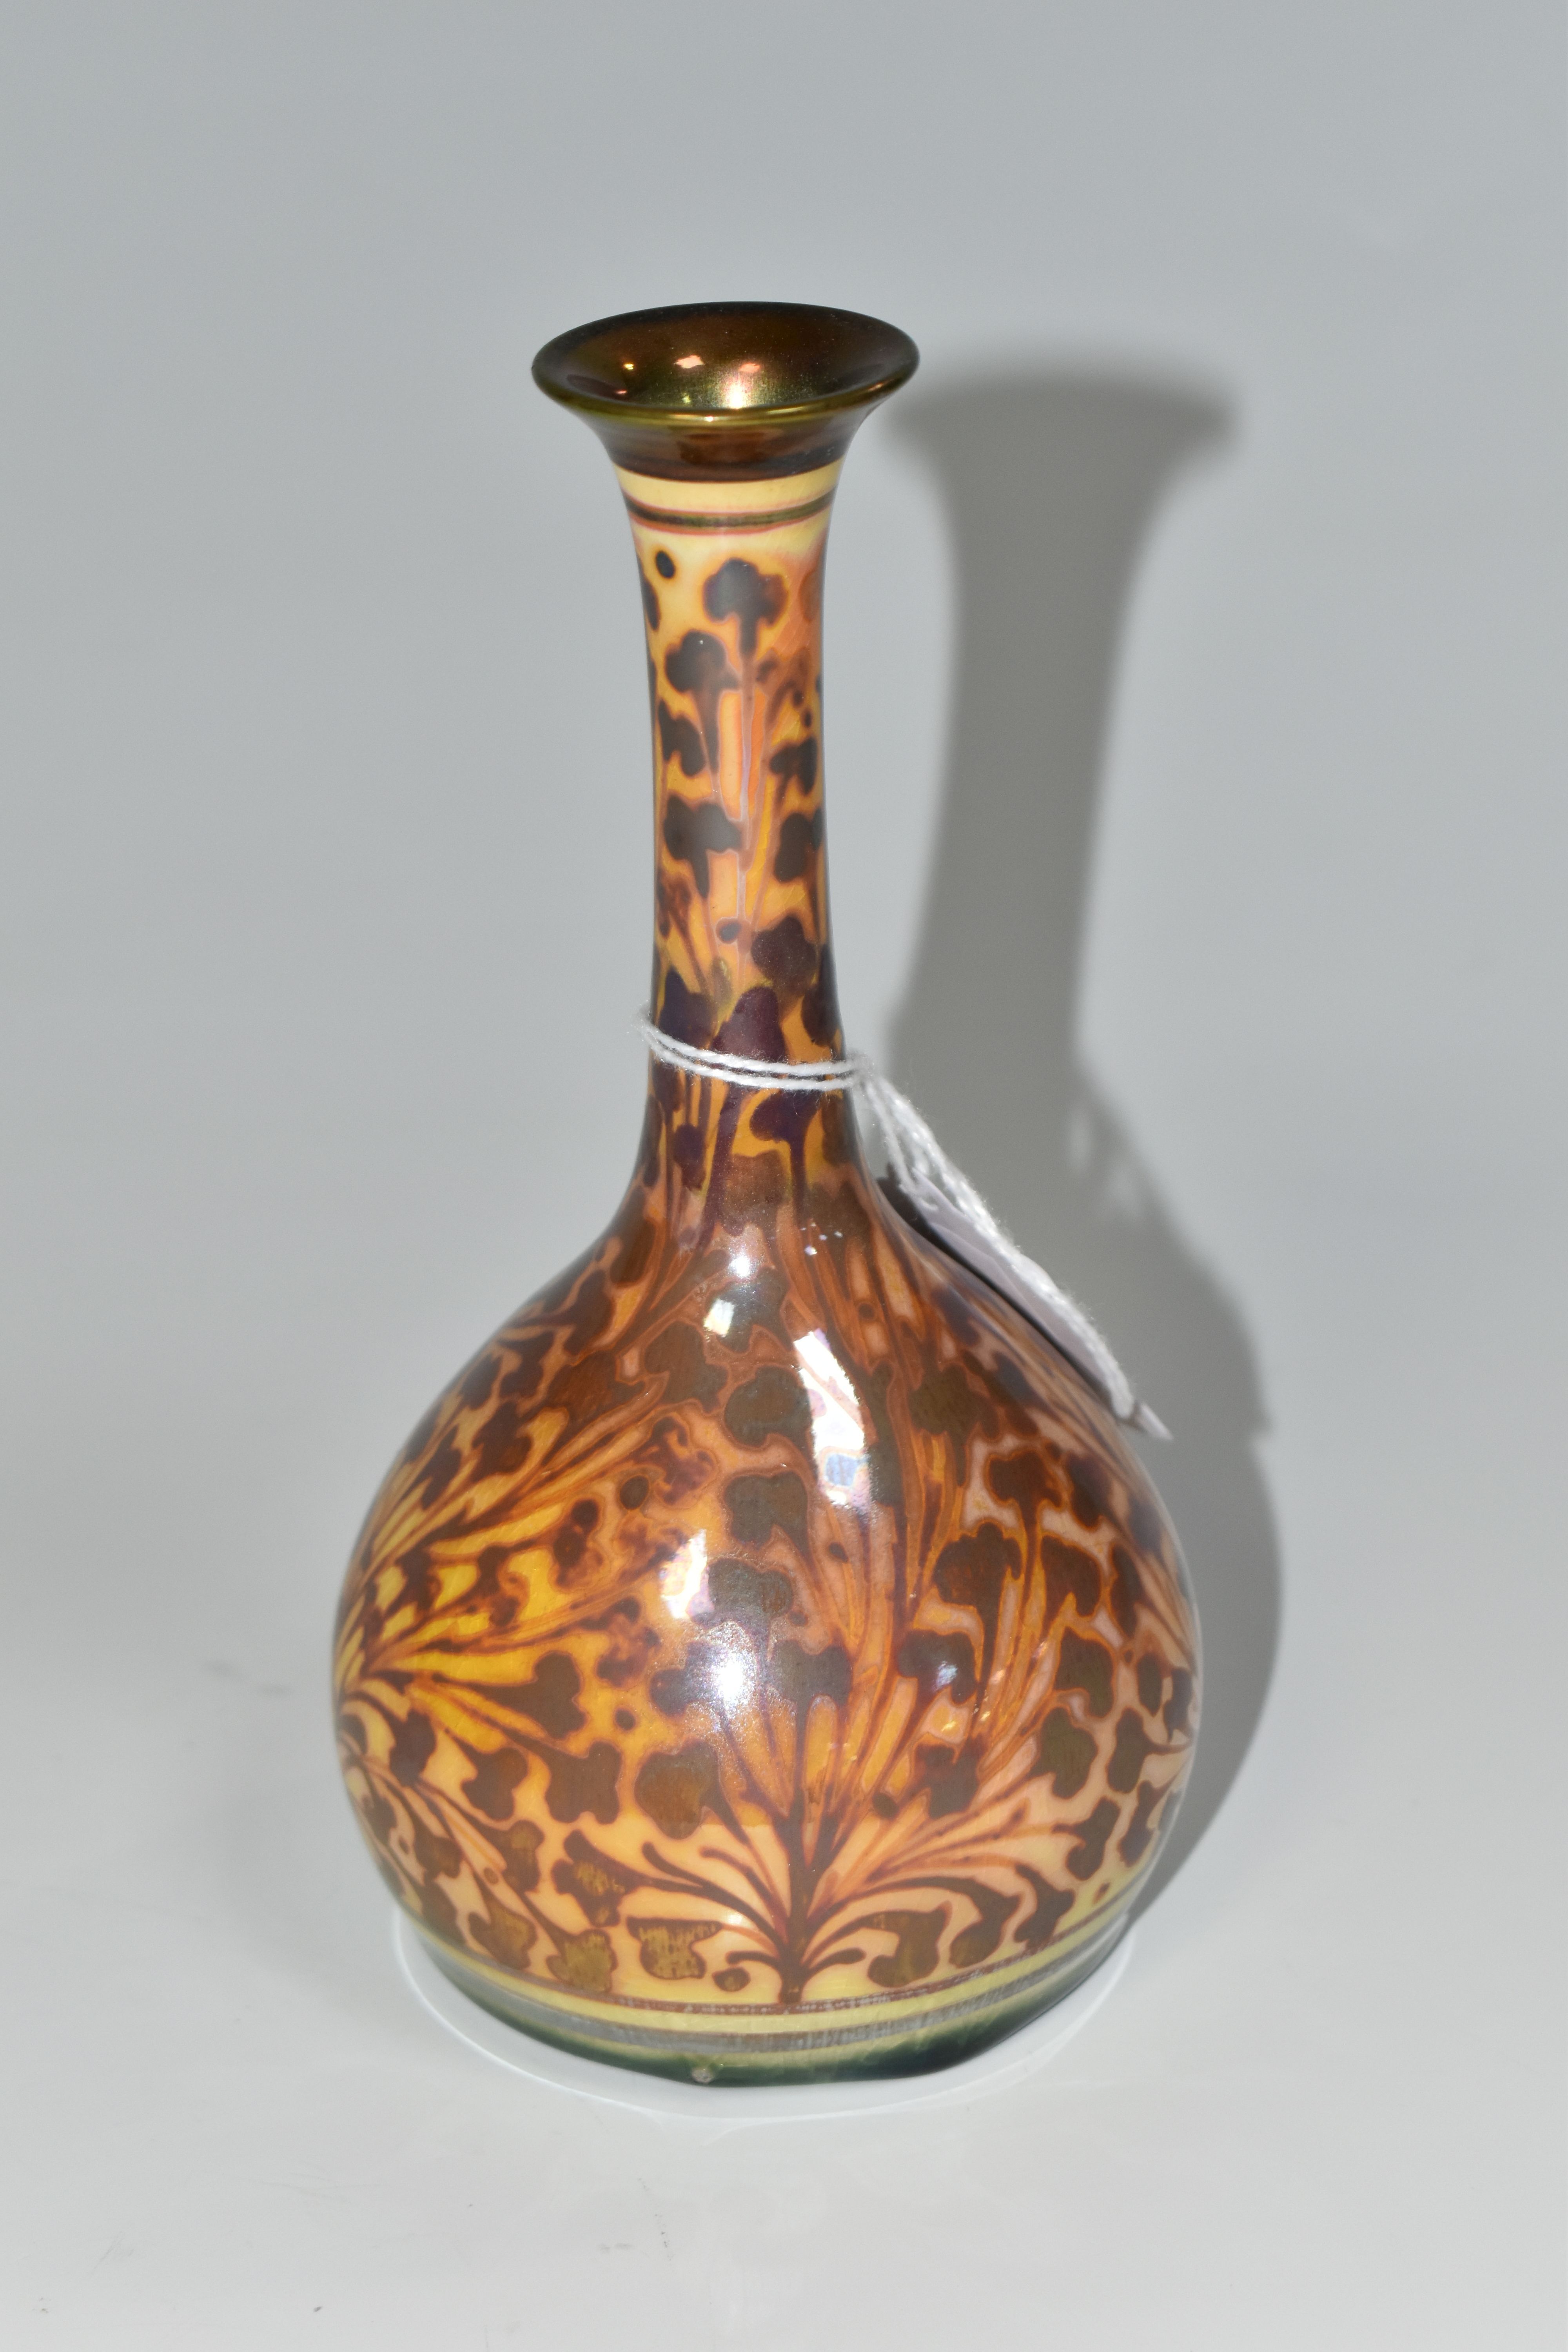 A PILKINGTON'S BUD VASE, with foliate decoration on a yellow ground, model no 2598, impressed P - Image 2 of 5